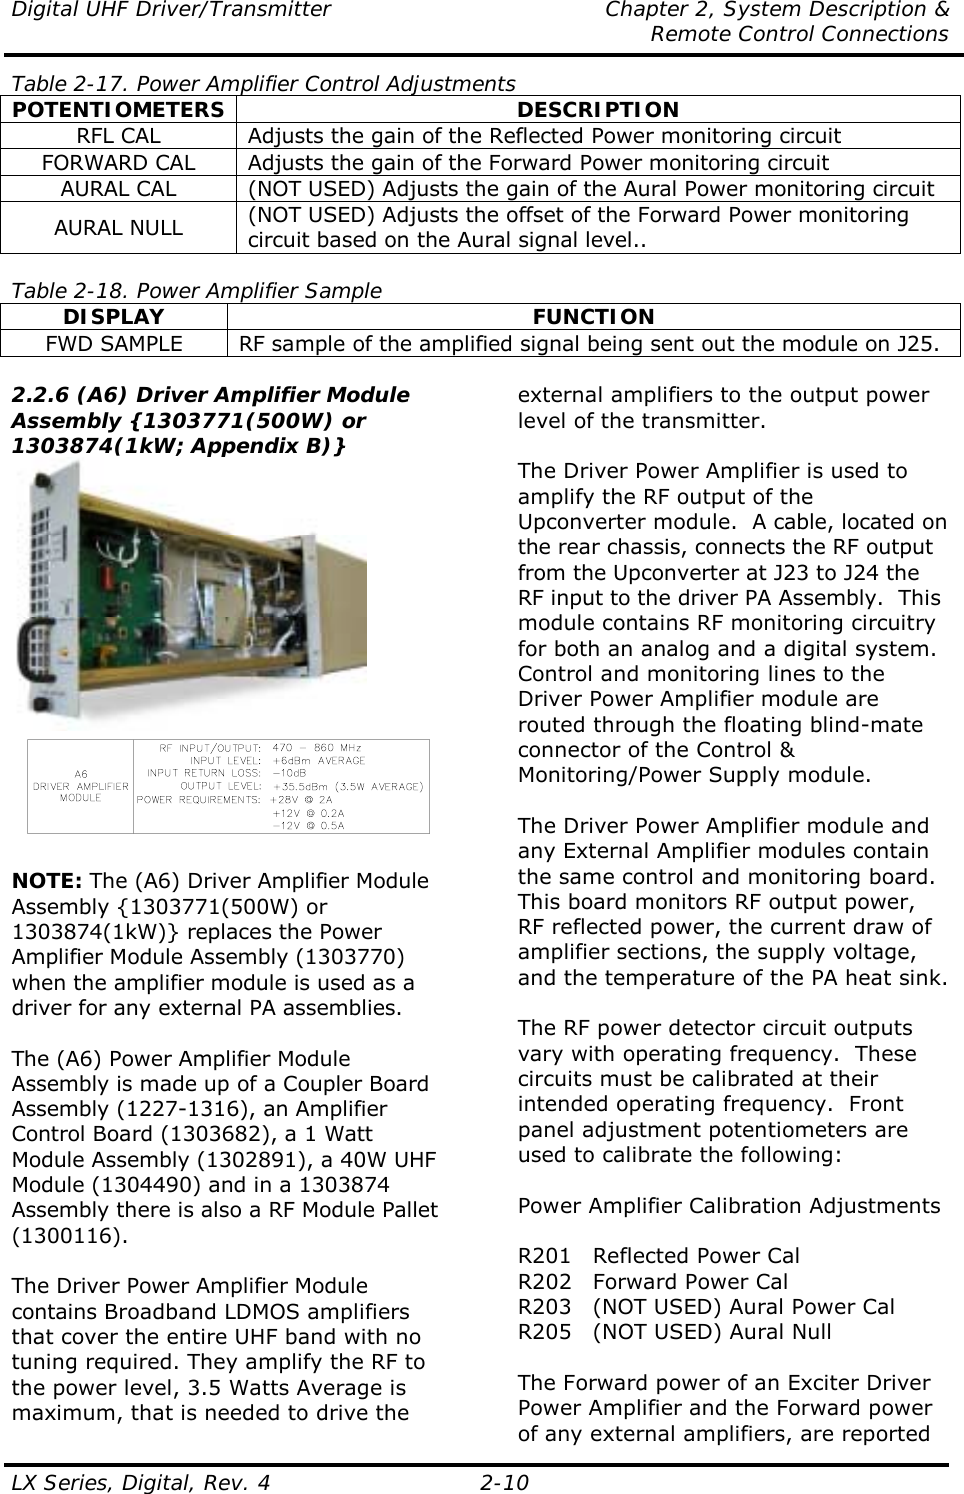 Digital UHF Driver/Transmitter  Chapter 2, System Description &amp;   Remote Control Connections LX Series, Digital, Rev. 4    2-10 Table 2-17. Power Amplifier Control Adjustments POTENTIOMETERS DESCRIPTION RFL CAL  Adjusts the gain of the Reflected Power monitoring circuit FORWARD CAL  Adjusts the gain of the Forward Power monitoring circuit AURAL CAL  (NOT USED) Adjusts the gain of the Aural Power monitoring circuit AURAL NULL  (NOT USED) Adjusts the offset of the Forward Power monitoring circuit based on the Aural signal level..  Table 2-18. Power Amplifier Sample DISPLAY FUNCTION FWD SAMPLE  RF sample of the amplified signal being sent out the module on J25.  2.2.6 (A6) Driver Amplifier Module Assembly {1303771(500W) or 1303874(1kW; Appendix B)}    NOTE: The (A6) Driver Amplifier Module Assembly {1303771(500W) or 1303874(1kW)} replaces the Power Amplifier Module Assembly (1303770) when the amplifier module is used as a driver for any external PA assemblies.  The (A6) Power Amplifier Module Assembly is made up of a Coupler Board Assembly (1227-1316), an Amplifier Control Board (1303682), a 1 Watt Module Assembly (1302891), a 40W UHF Module (1304490) and in a 1303874 Assembly there is also a RF Module Pallet (1300116).  The Driver Power Amplifier Module contains Broadband LDMOS amplifiers that cover the entire UHF band with no tuning required. They amplify the RF to the power level, 3.5 Watts Average is maximum, that is needed to drive the external amplifiers to the output power level of the transmitter.  The Driver Power Amplifier is used to amplify the RF output of the Upconverter module.  A cable, located on the rear chassis, connects the RF output from the Upconverter at J23 to J24 the RF input to the driver PA Assembly.  This module contains RF monitoring circuitry for both an analog and a digital system.  Control and monitoring lines to the Driver Power Amplifier module are routed through the floating blind-mate connector of the Control &amp; Monitoring/Power Supply module.  The Driver Power Amplifier module and any External Amplifier modules contain the same control and monitoring board.  This board monitors RF output power, RF reflected power, the current draw of amplifier sections, the supply voltage, and the temperature of the PA heat sink.  The RF power detector circuit outputs vary with operating frequency.  These circuits must be calibrated at their intended operating frequency.  Front panel adjustment potentiometers are used to calibrate the following:  Power Amplifier Calibration Adjustments  R201  Reflected Power Cal R202  Forward Power Cal R203  (NOT USED) Aural Power Cal R205  (NOT USED) Aural Null  The Forward power of an Exciter Driver Power Amplifier and the Forward power of any external amplifiers, are reported 